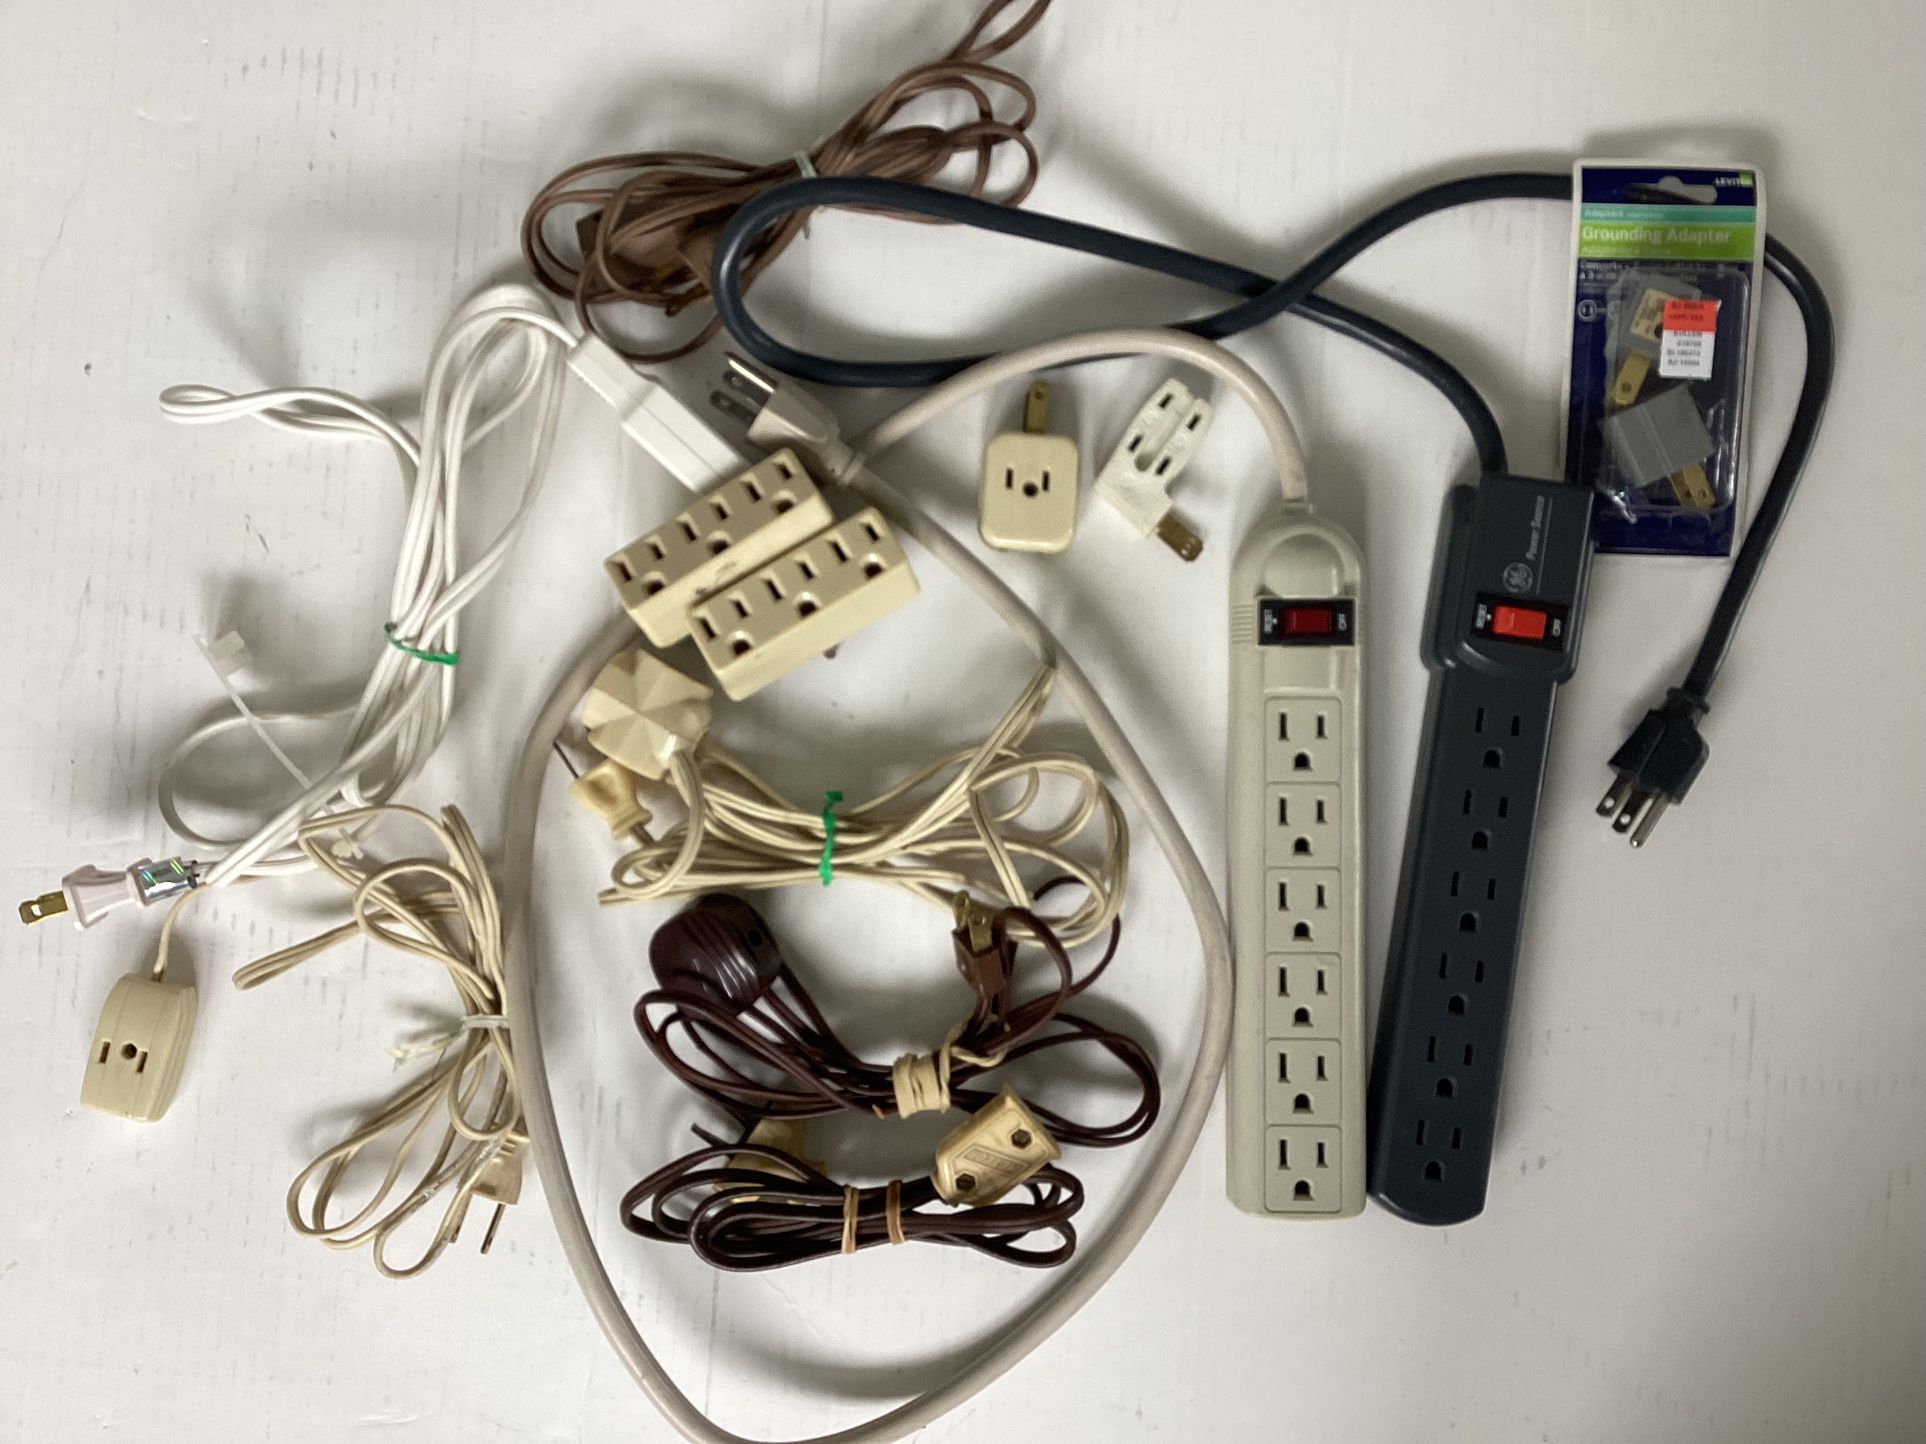 Vtg. 14 Pcs. Electrical Devices Surge Protector Power Strips, Ground Adapter, Extension Cords, Bakelite Connector,Triple Outlet Adapters etc. Preowned